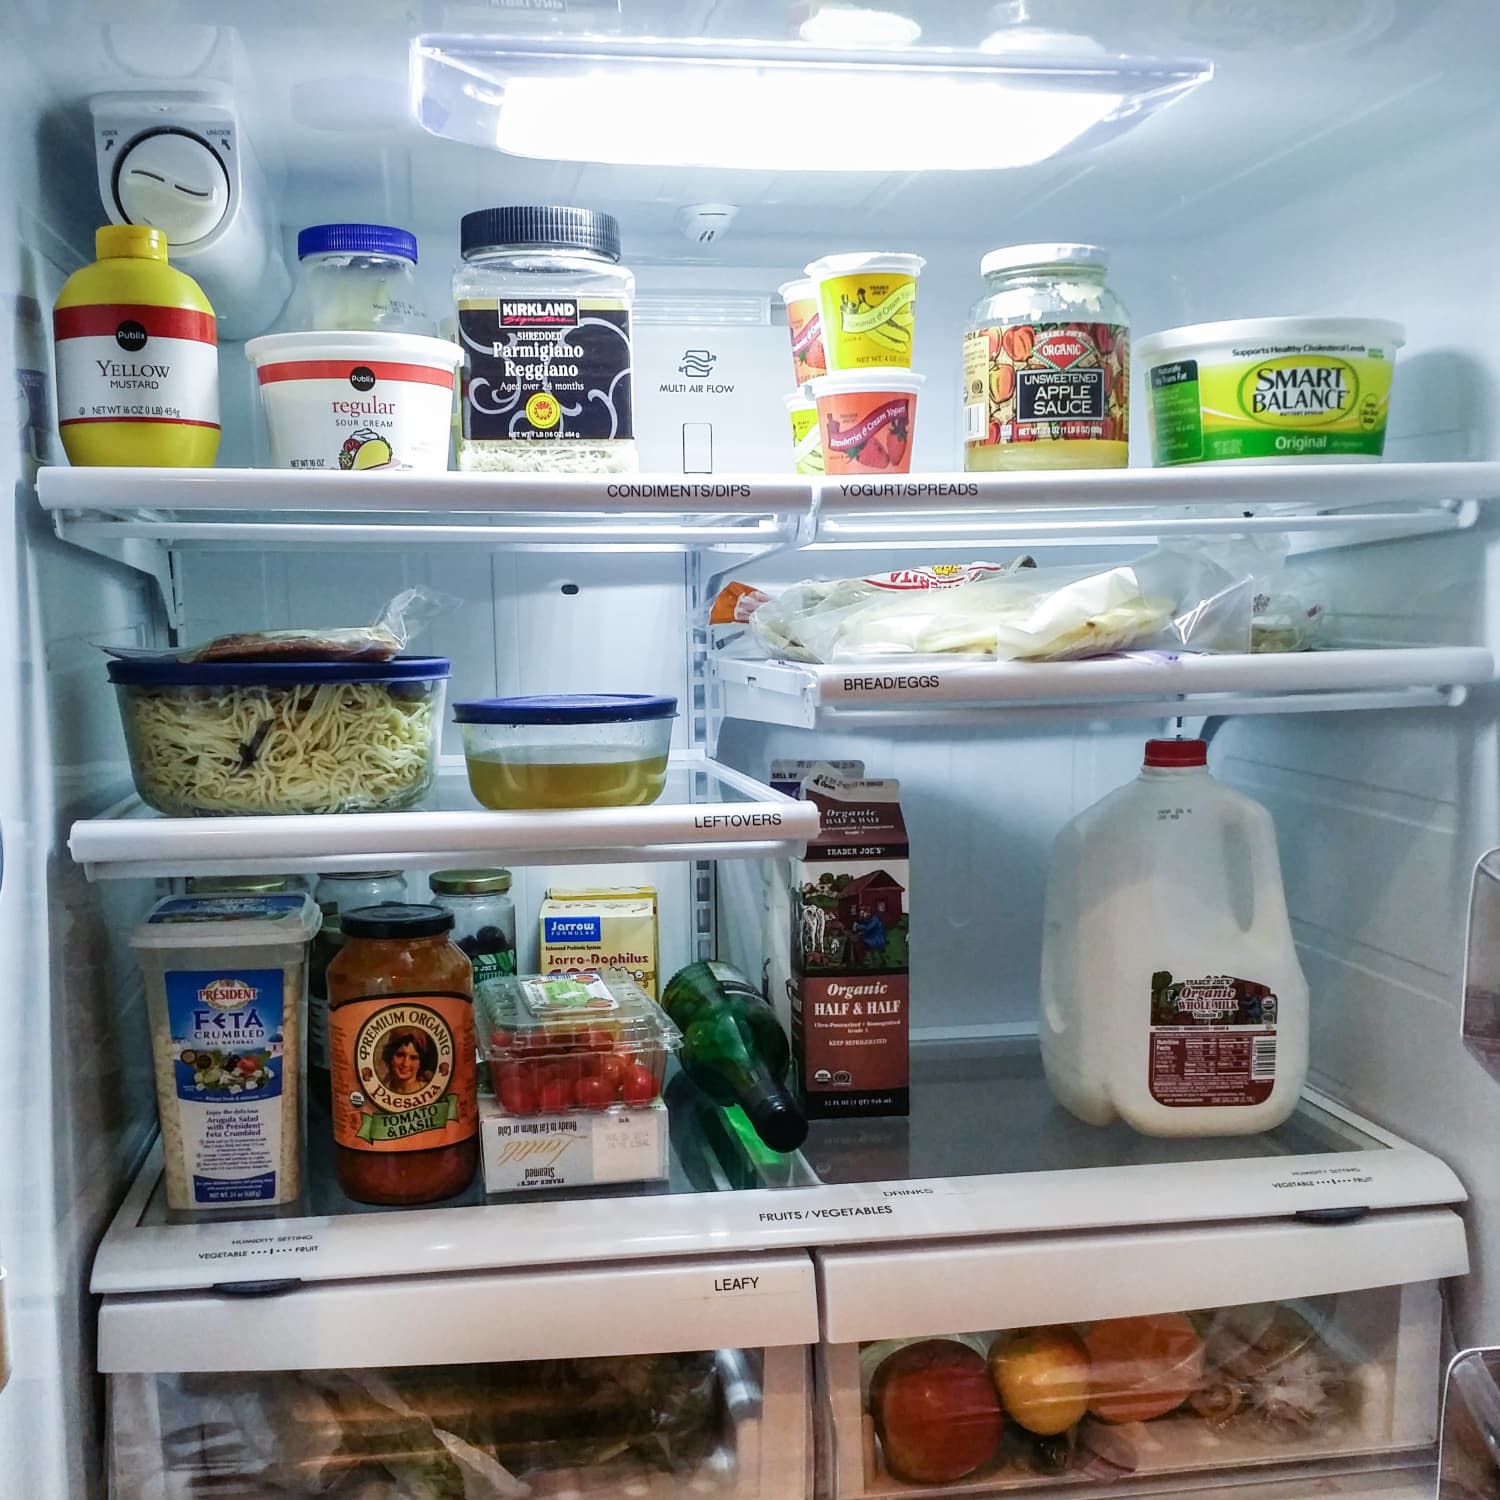 How to Clean Out a Refrigerator